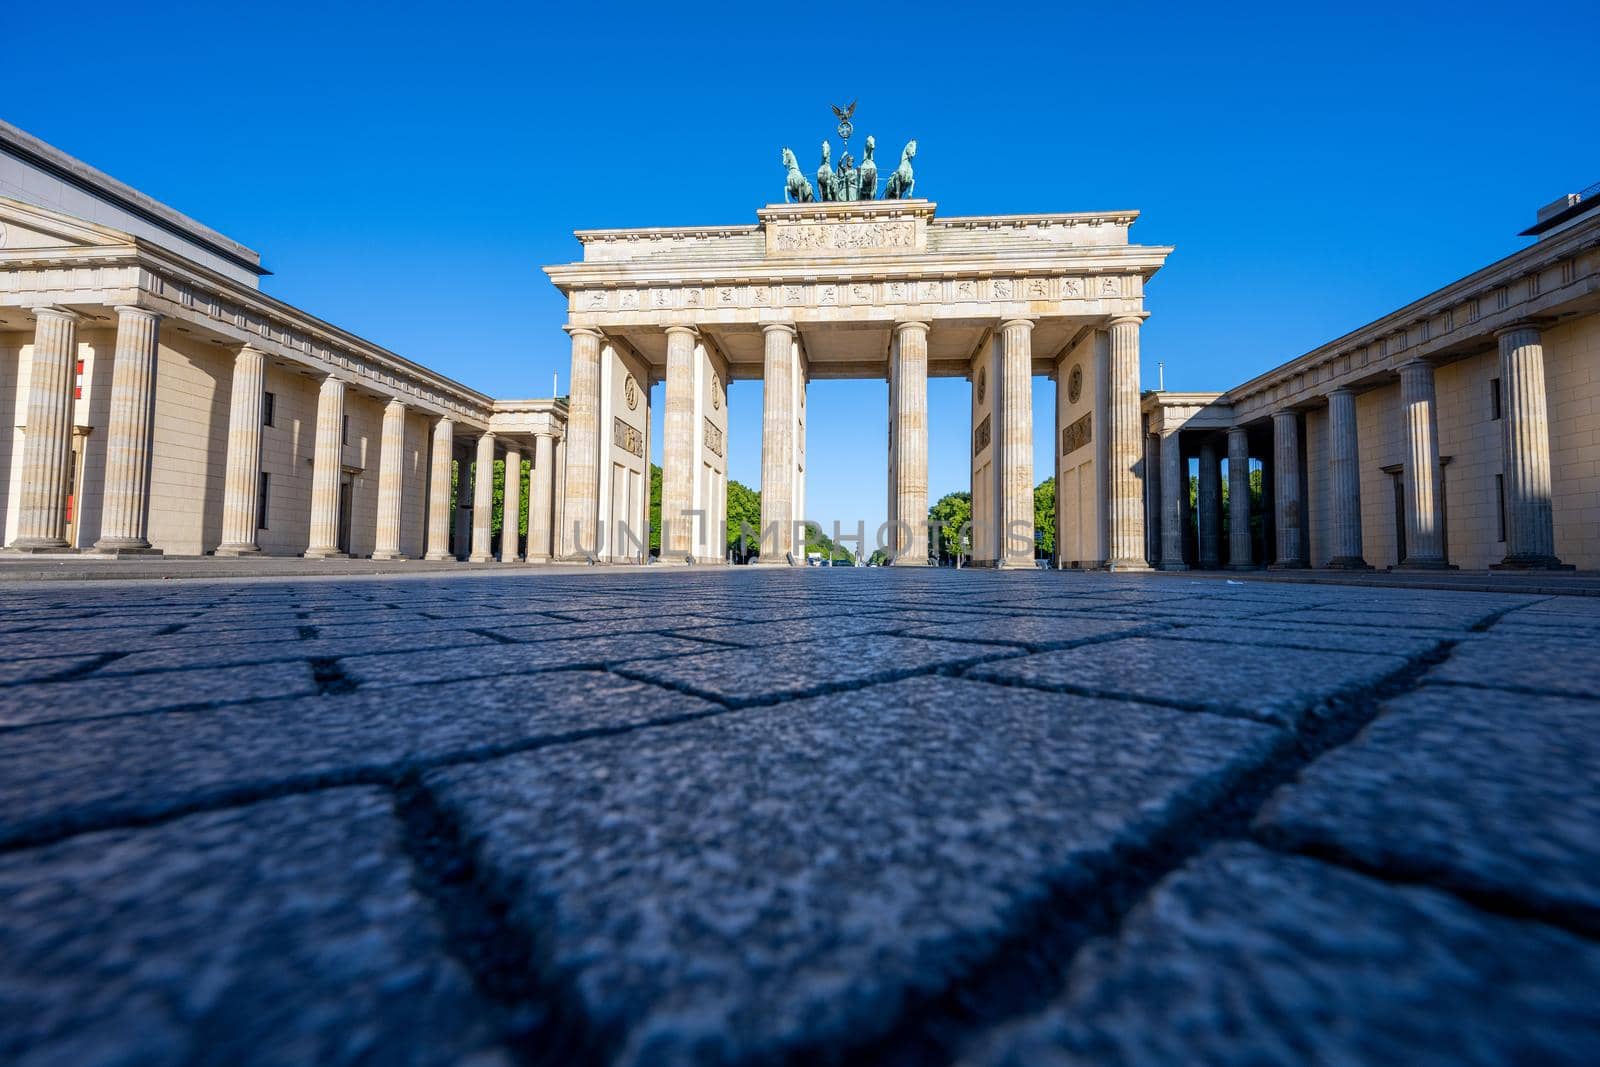 Low angle view of the famous Brandenburg Gate in Berlin